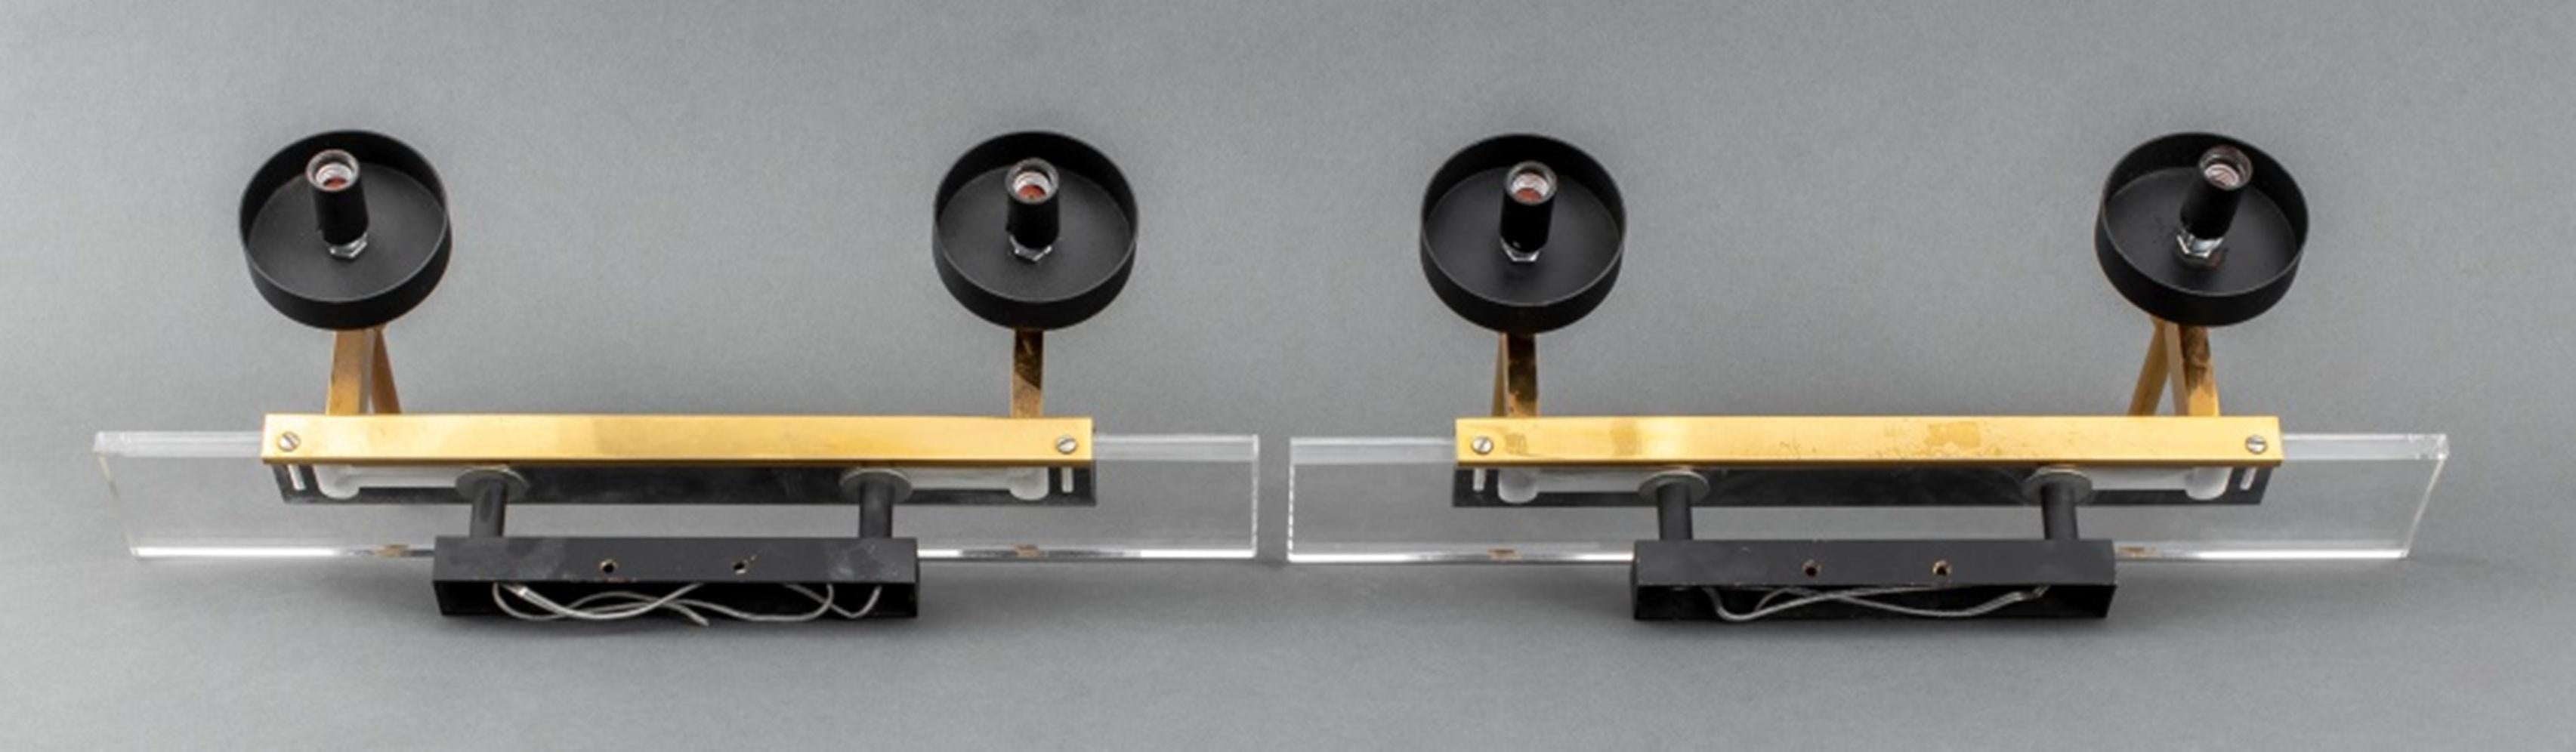 Italian Stilnovo Mid-Century Modern Sconces, Pair In Good Condition For Sale In New York, NY